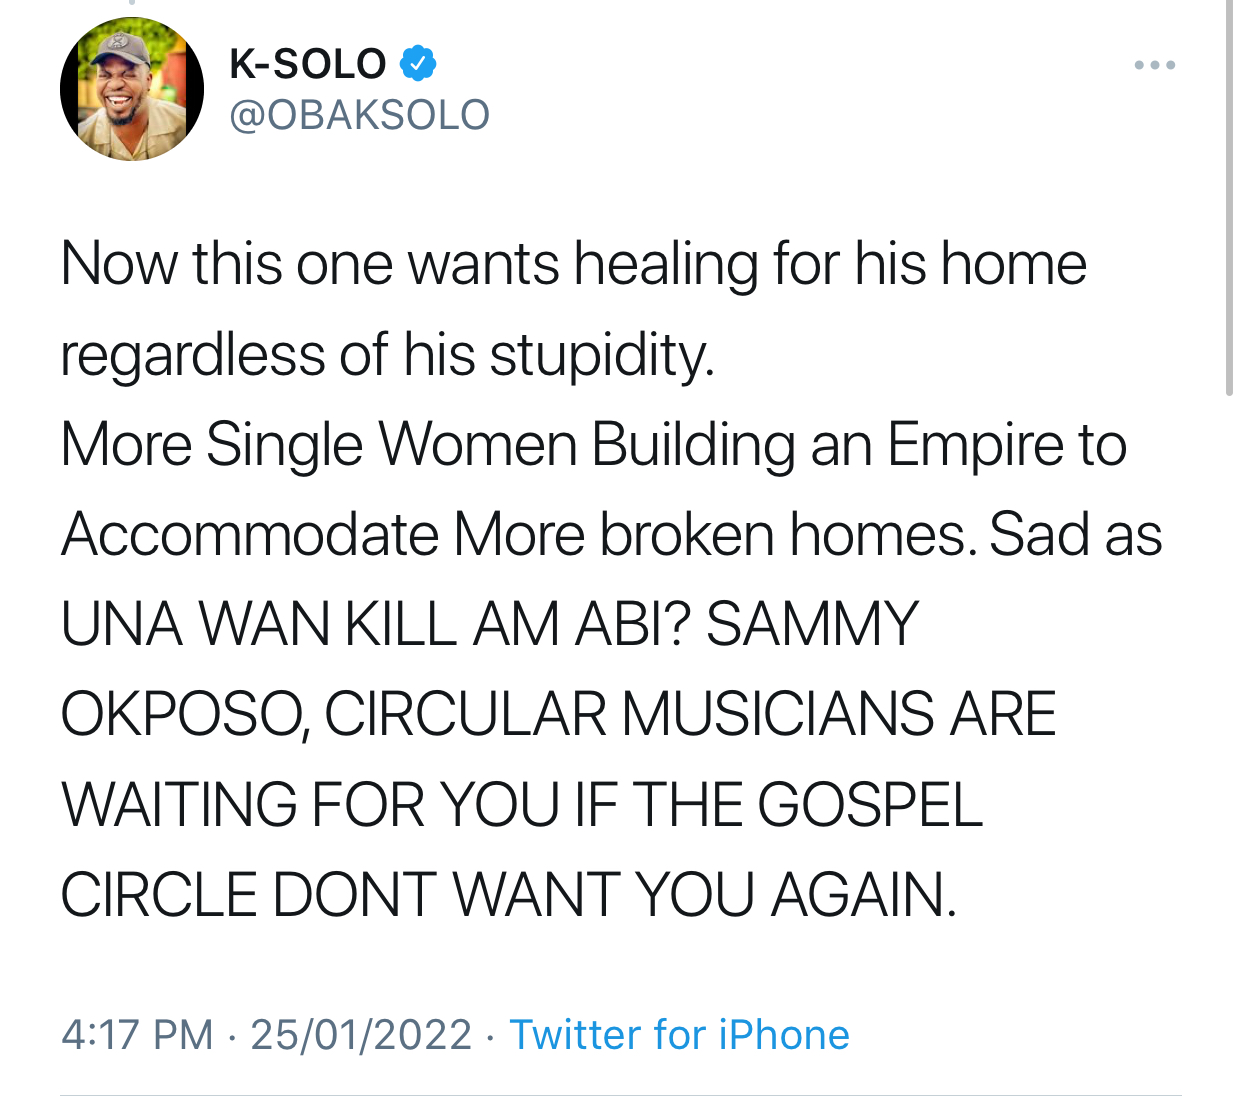 secular musicians are waiting for you if gospel circles reject you music producer ksolo tells sammie okposo 3